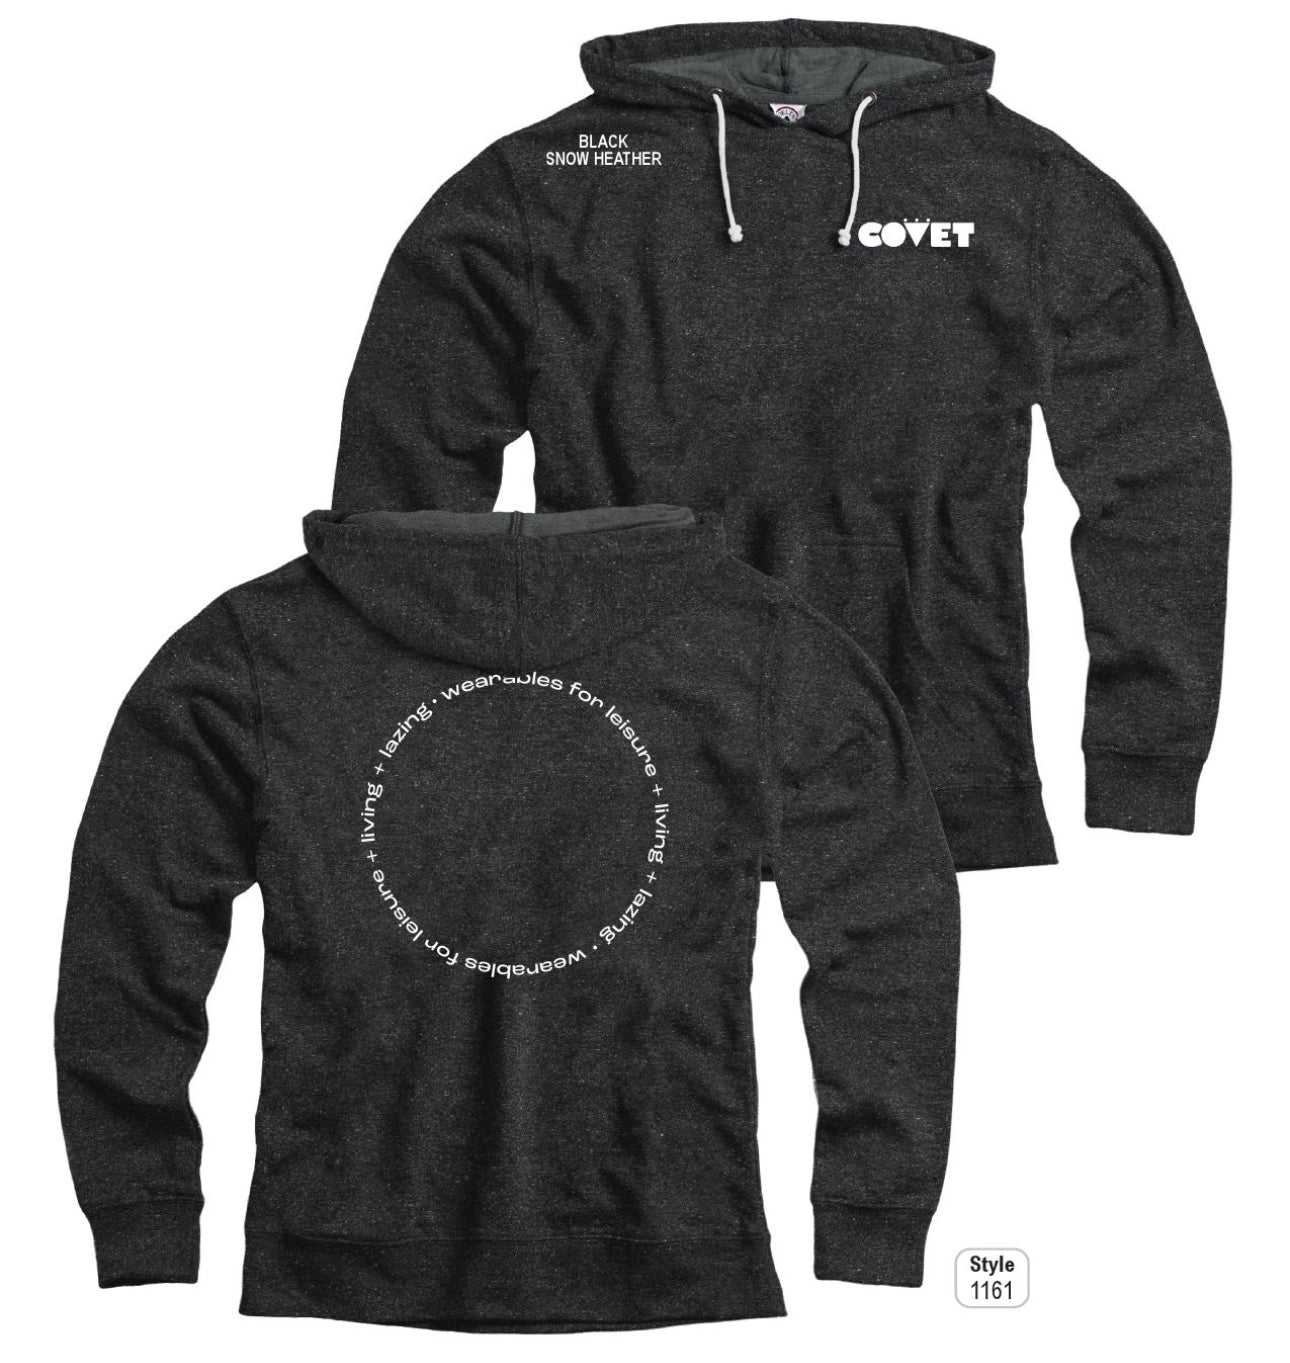 COVET Logo Hoodie with Tag Line